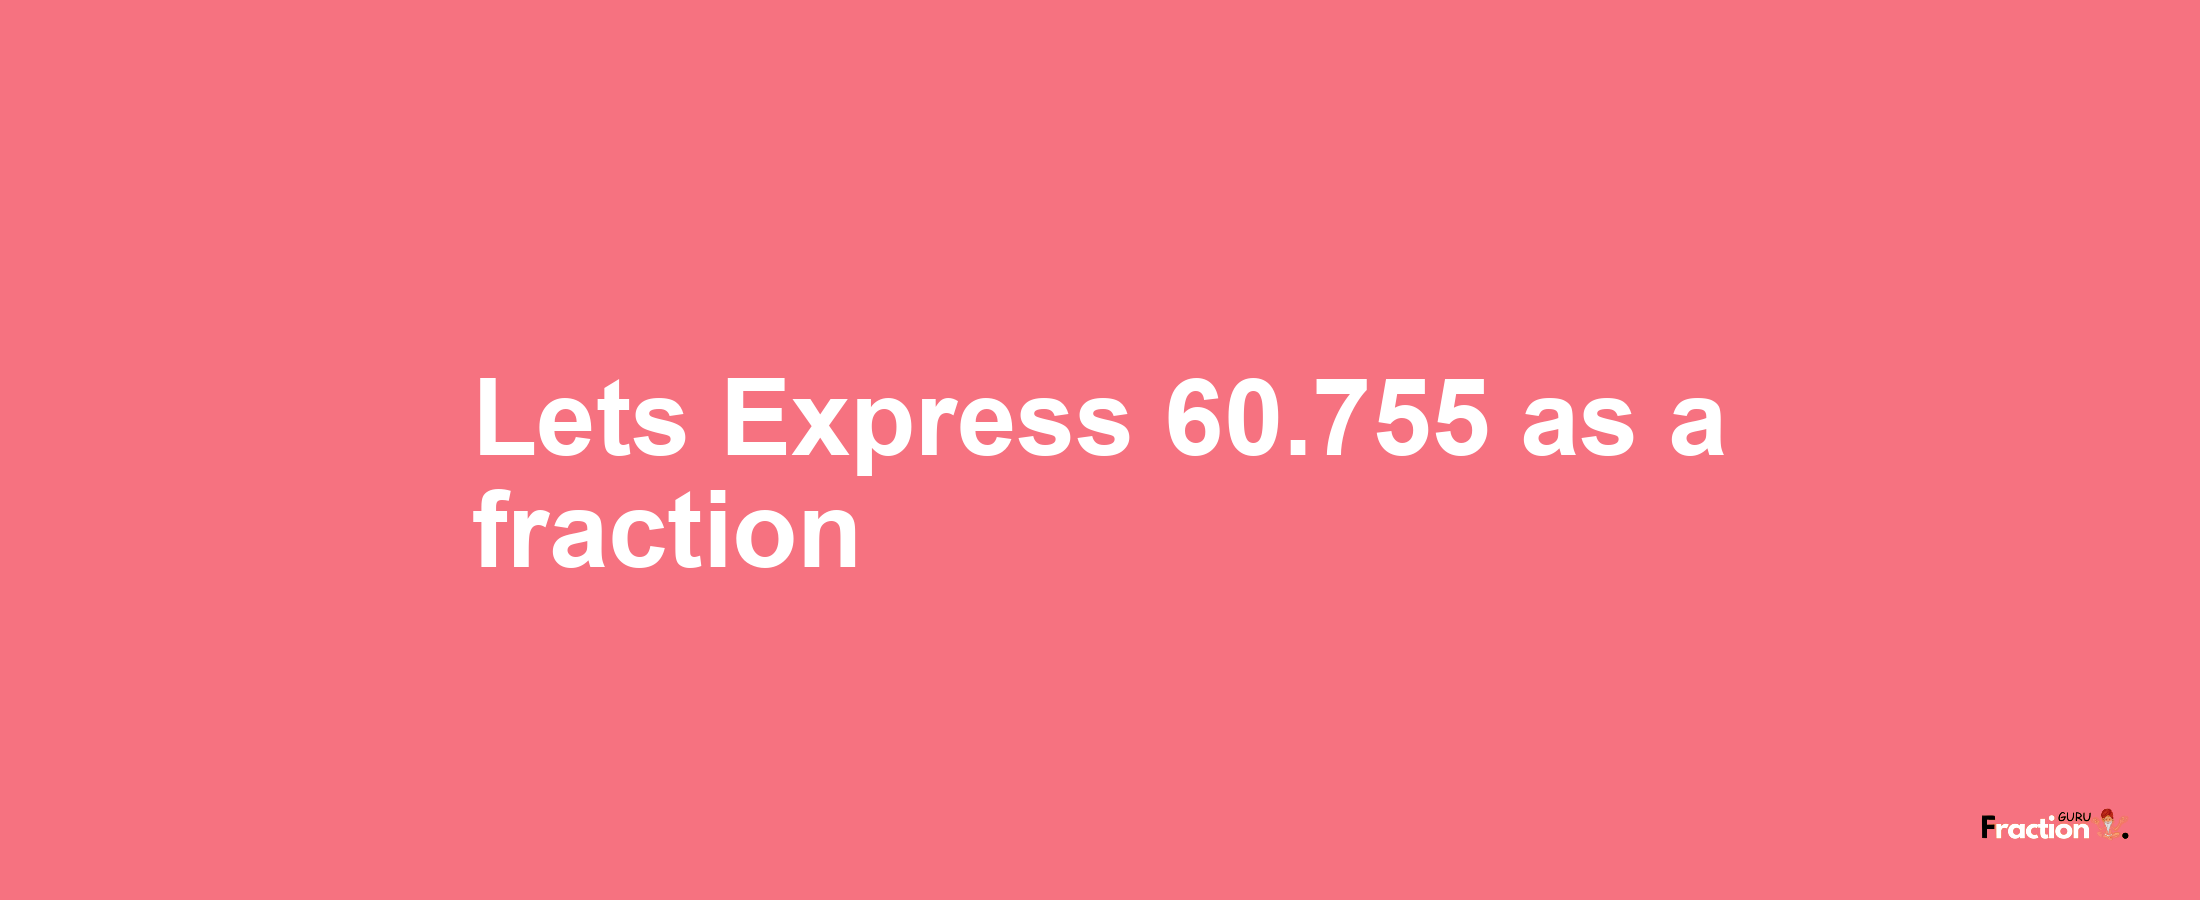 Lets Express 60.755 as afraction